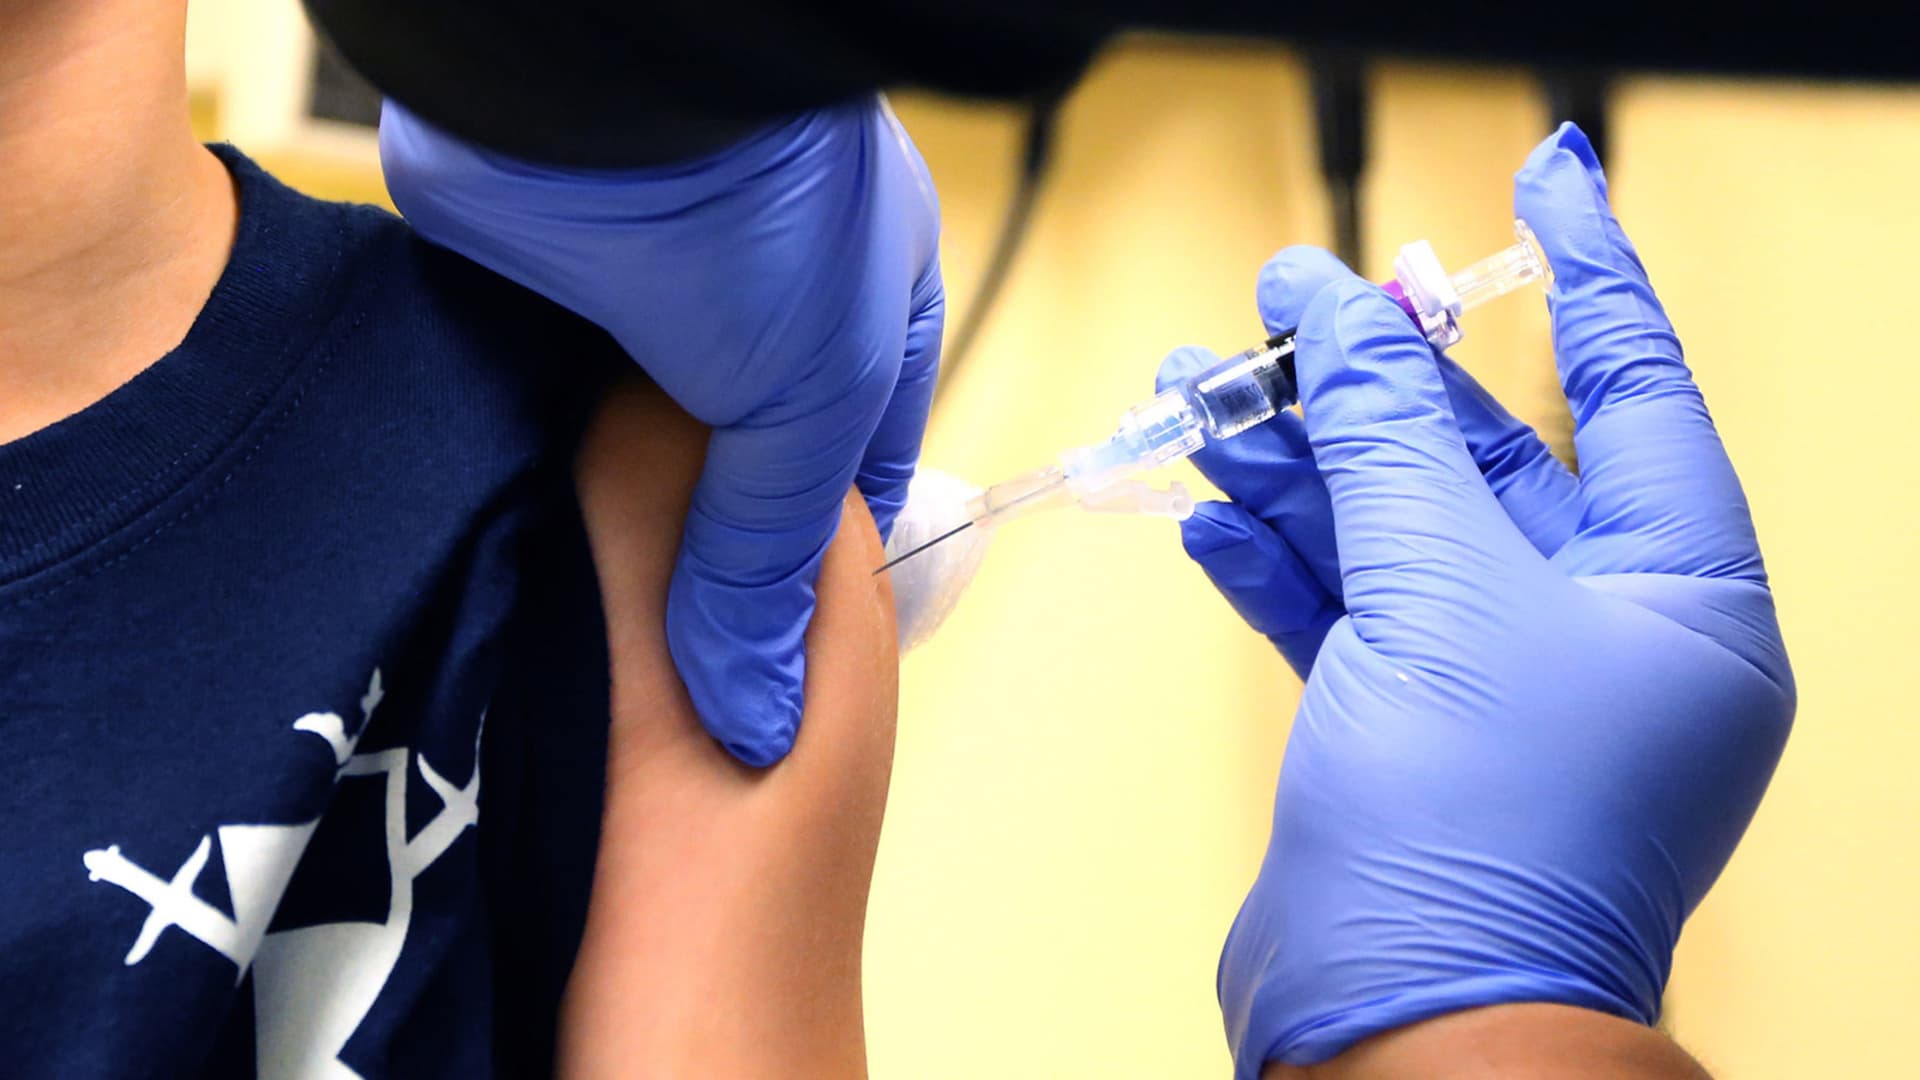 The first doses of the Covid-19 vaccine could go out next month. Distributing it to over 330 million people living in the U.S. is the next hurdle